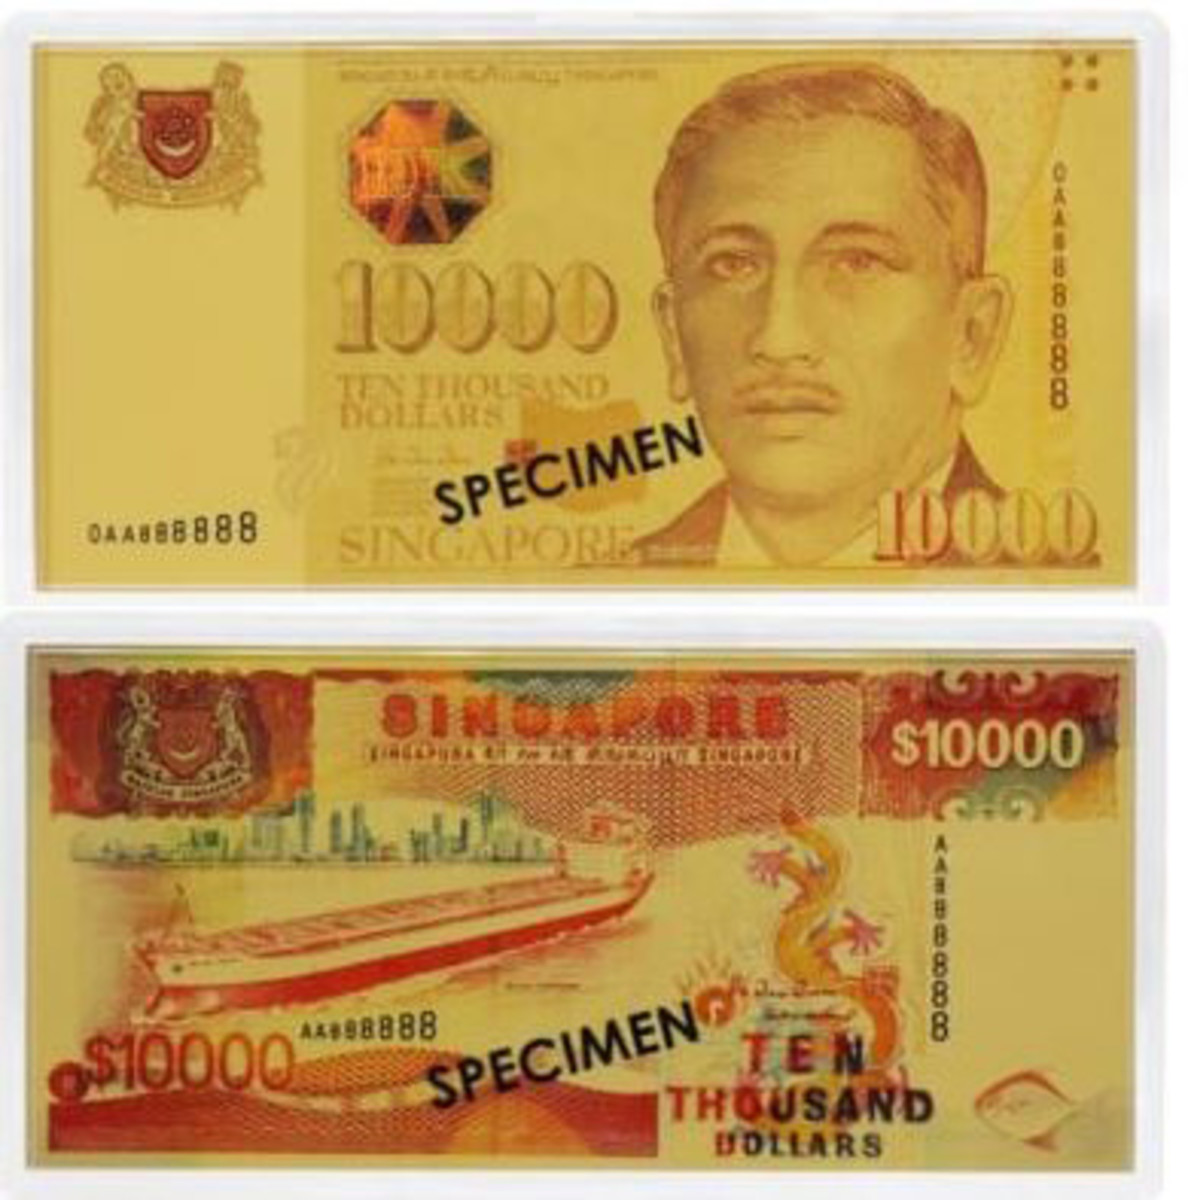 Singapore has recently issued metal replicas of the city-state’s legal tender S$1,000 bank note.